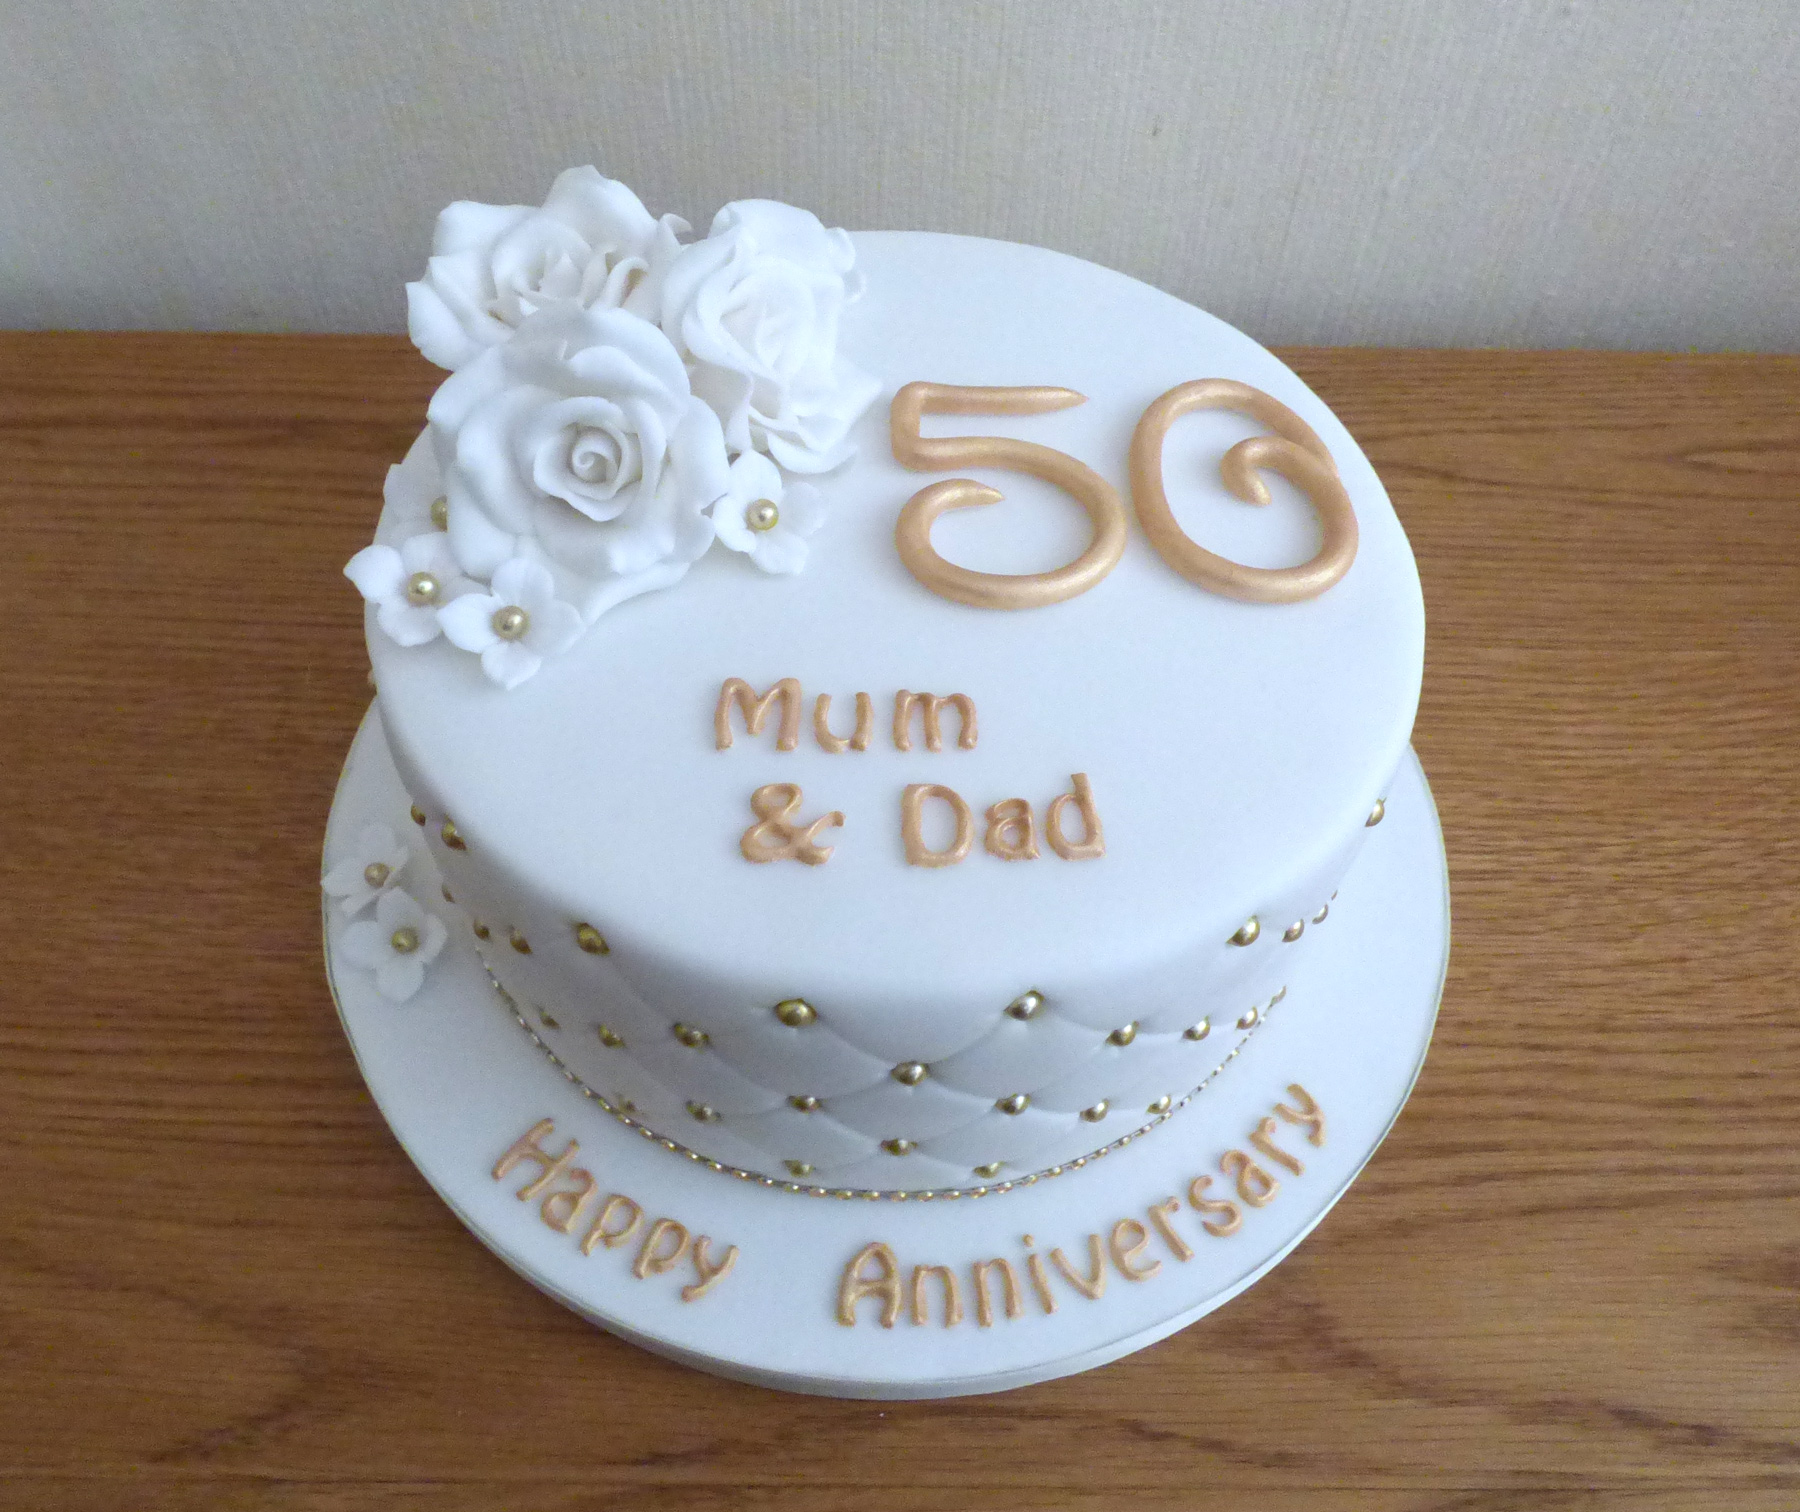 old couple in love anniversary cake